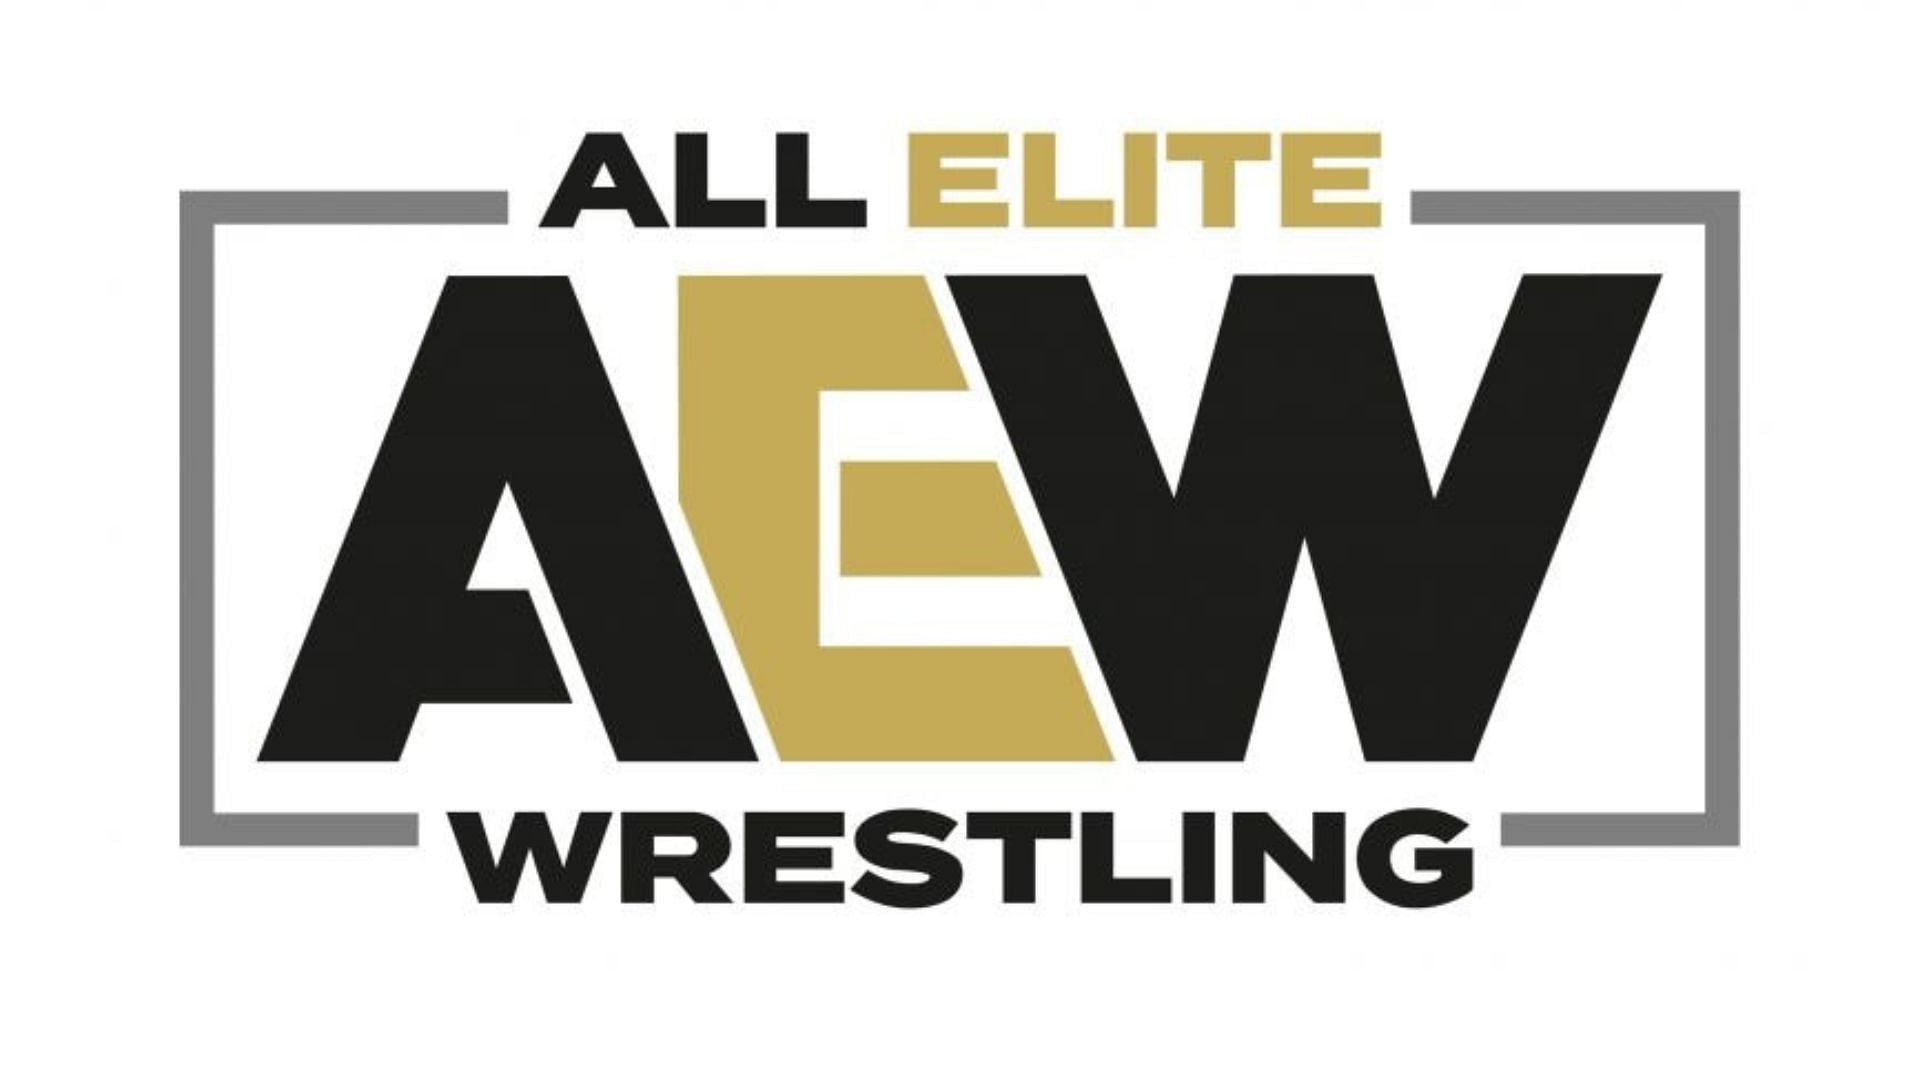 AEW is set to debut a recently signed star